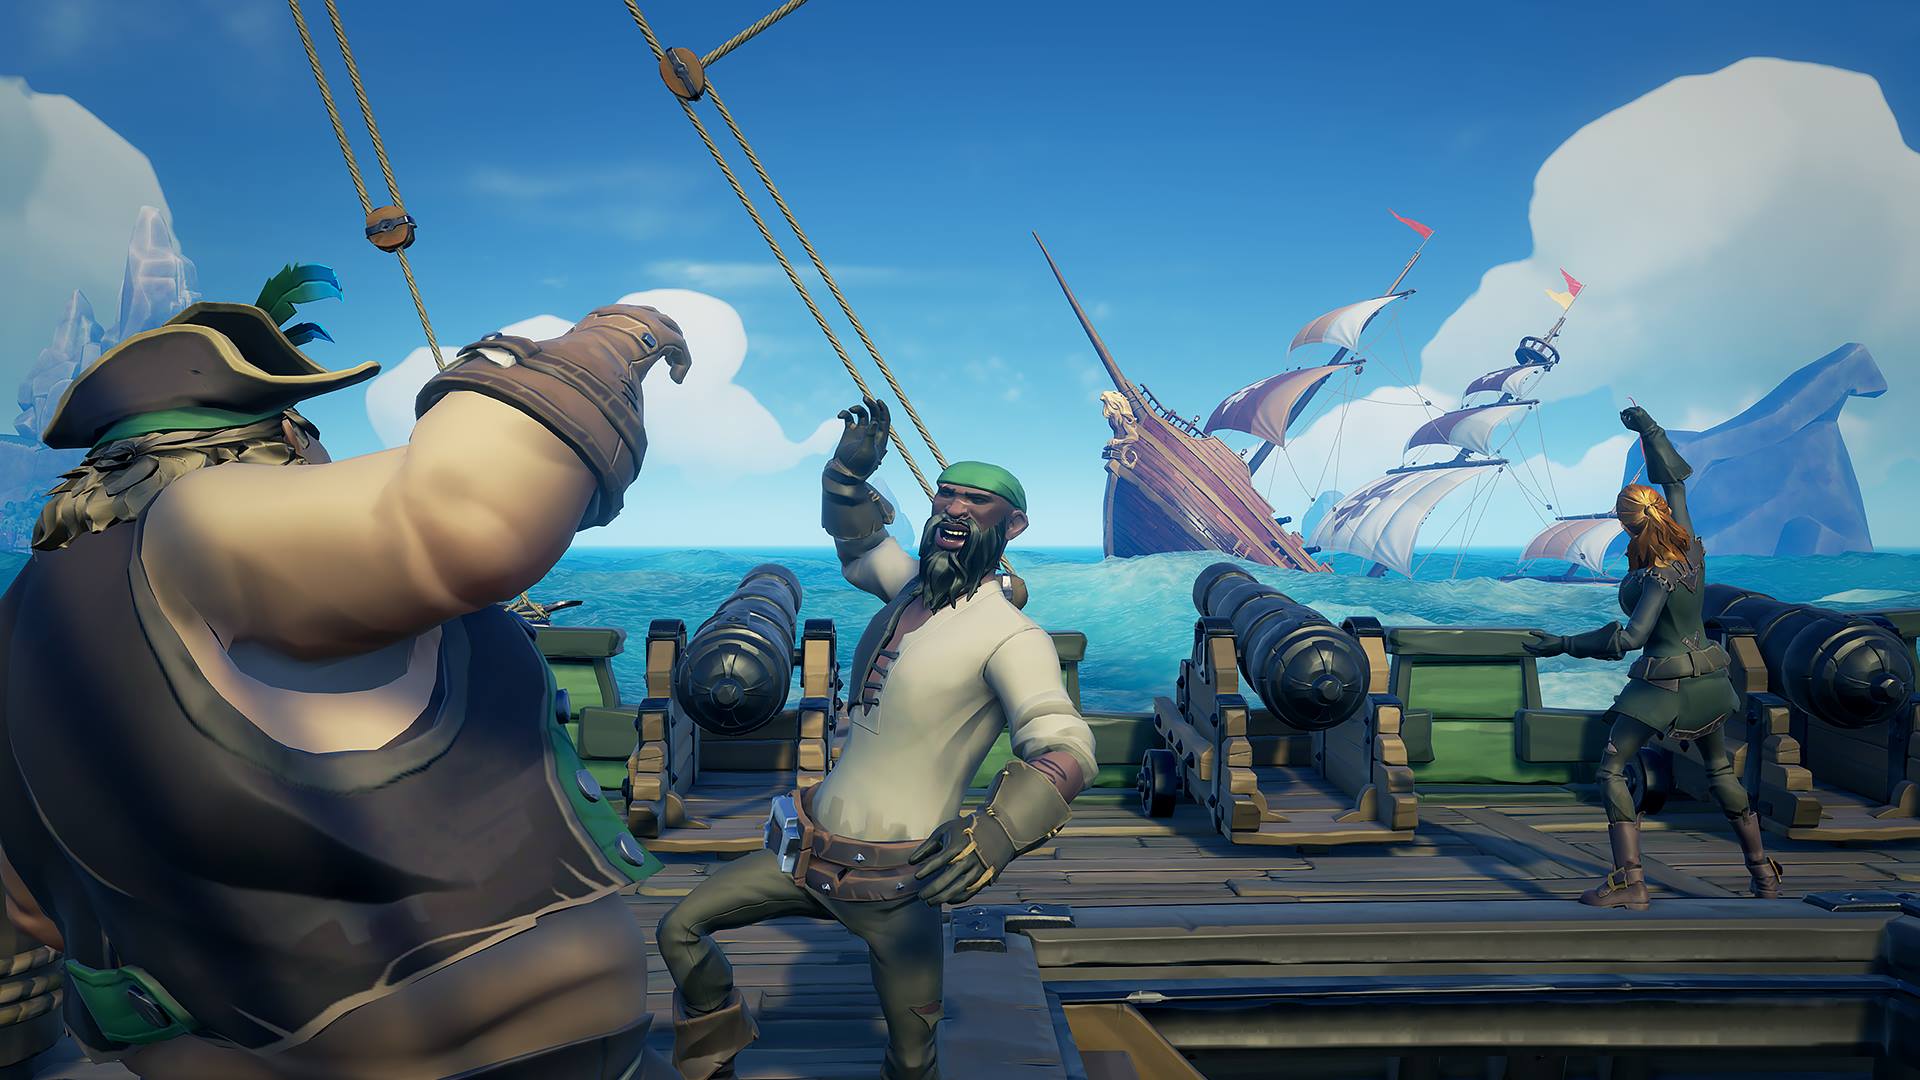 Sea Of Thieves Update 1.0.8 Xbox PC Adds New Player Settings And Improves VFX & Performance